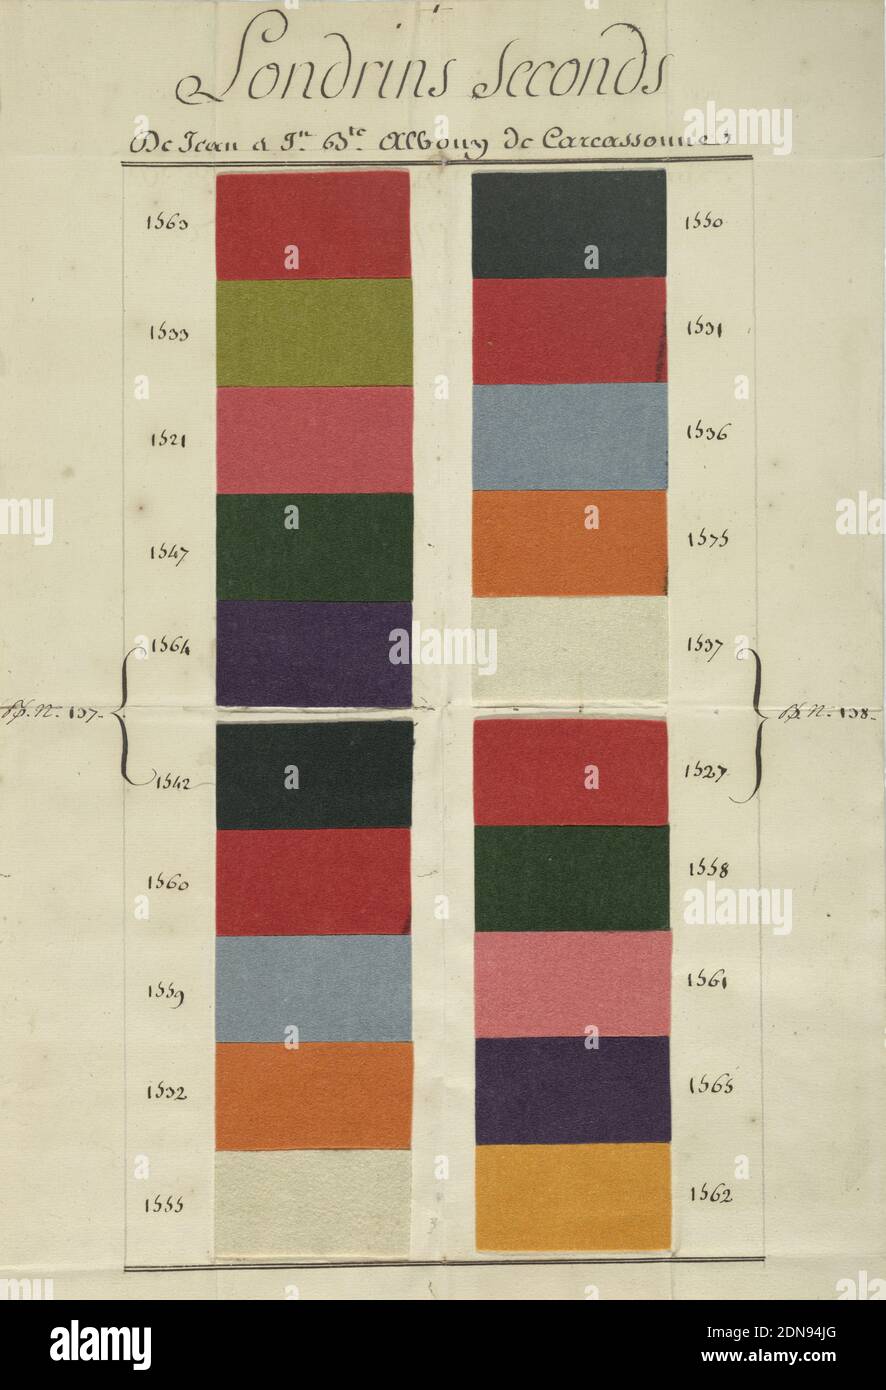 Sample sheet, Medium: paper and wool Technique: fulled plain weave, Sheet of paper pasted with double row of samples of fulled wool in bright colors, dark greens and purples, and white from Carcassonne, France. Intended for export to the eastern Mediterranean region., France, ca. 1746, sample books, Sample sheet Stock Photo